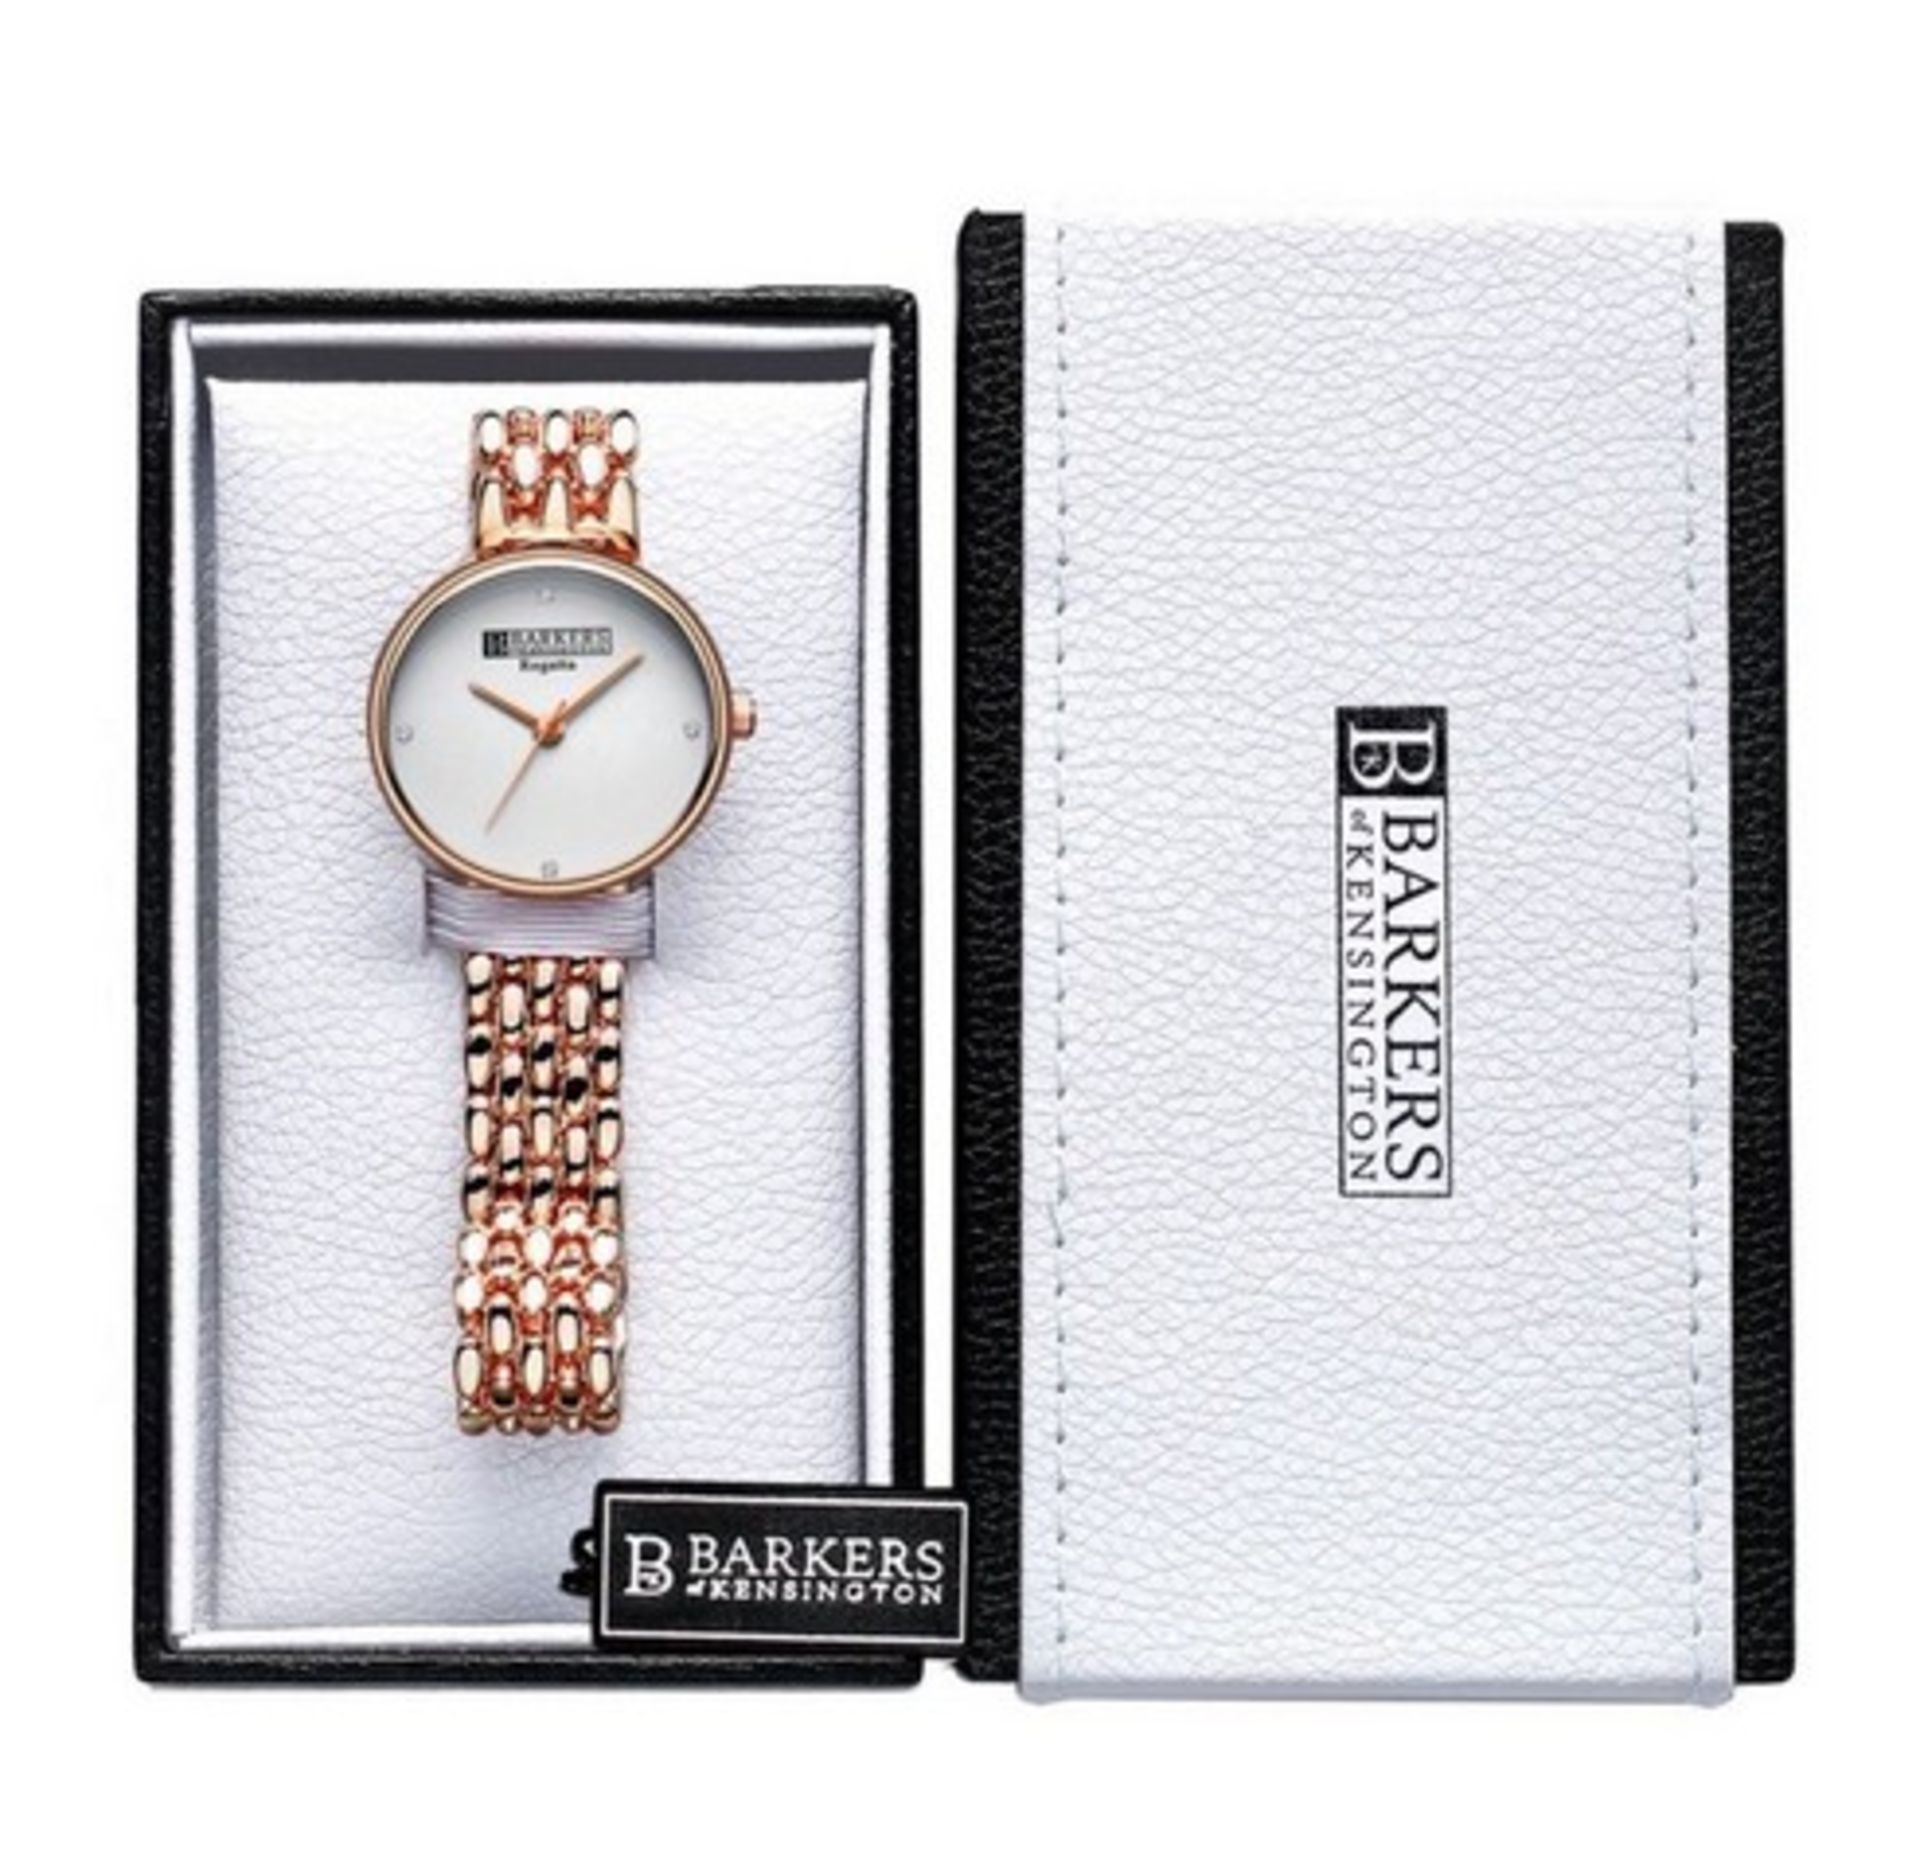 V Brand New Barkers Of Kensington Ladies Elegant Rose Gold Plated Regatta Watch Set With Four - Image 2 of 3